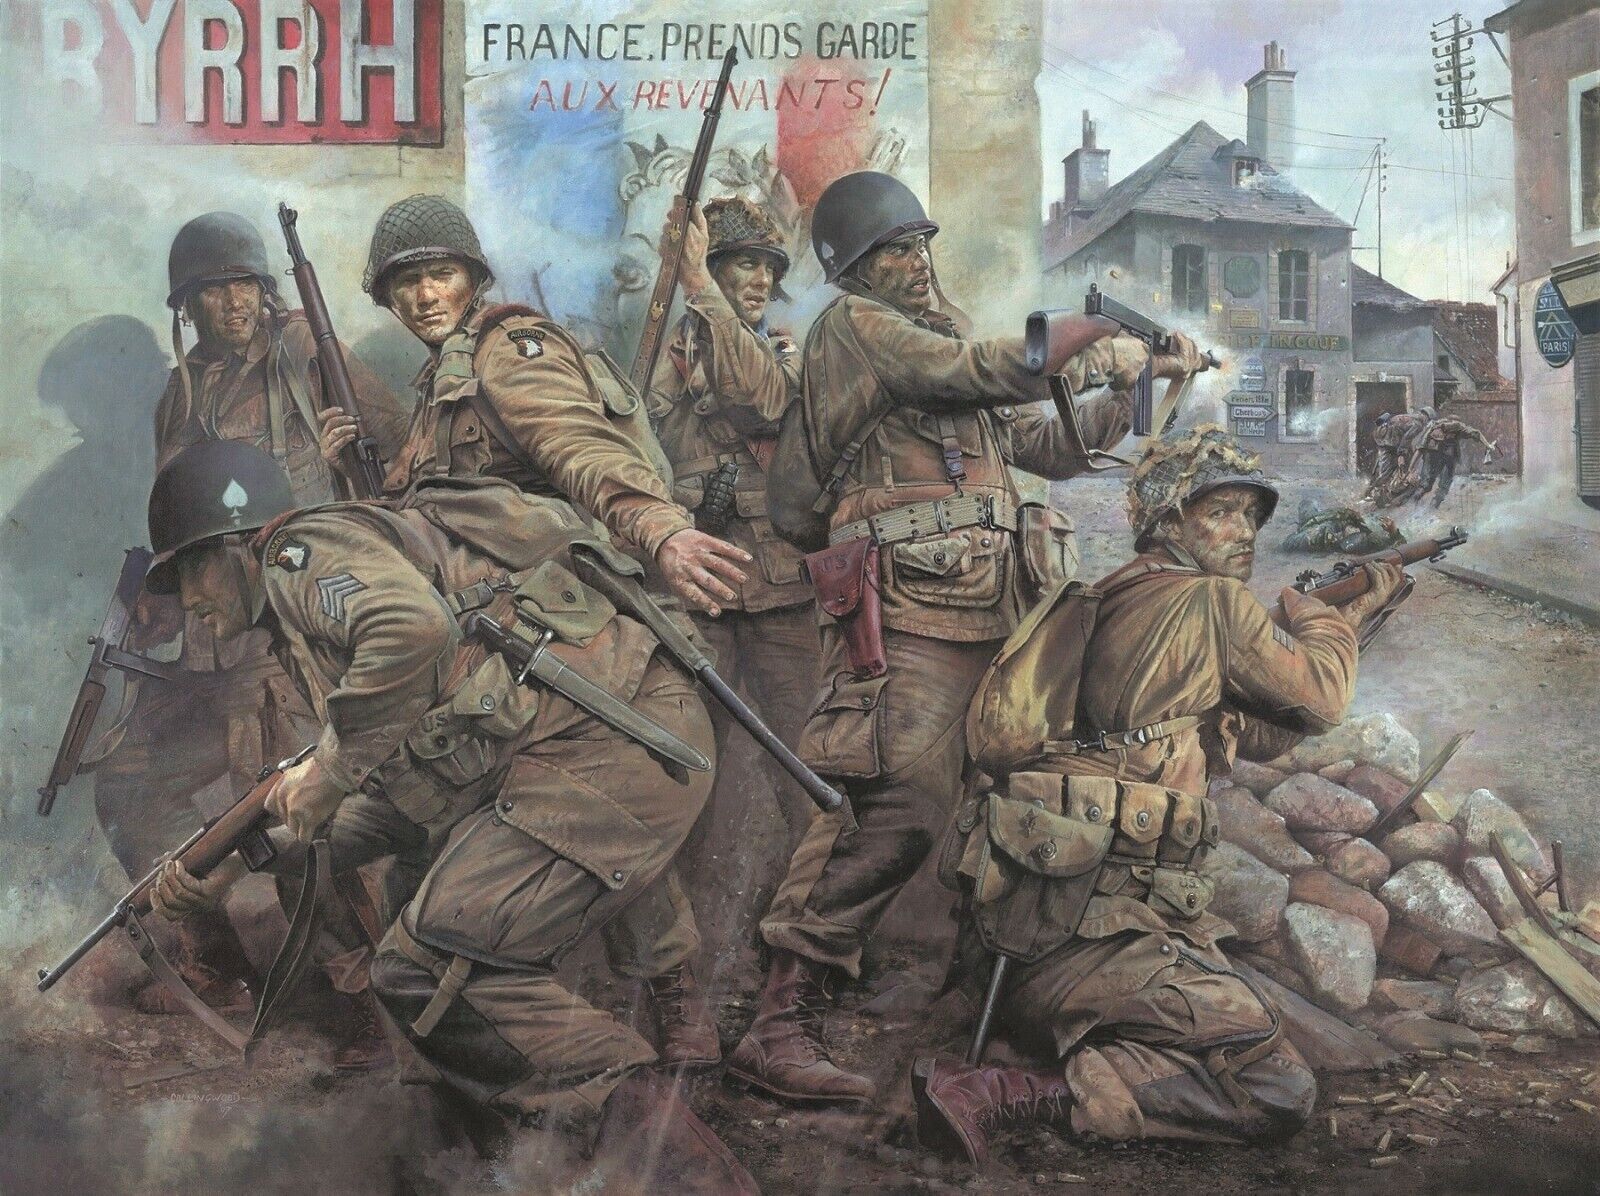 Easy Company - Carentan by Chris Collingwood, Artist Proof Band of Brothers